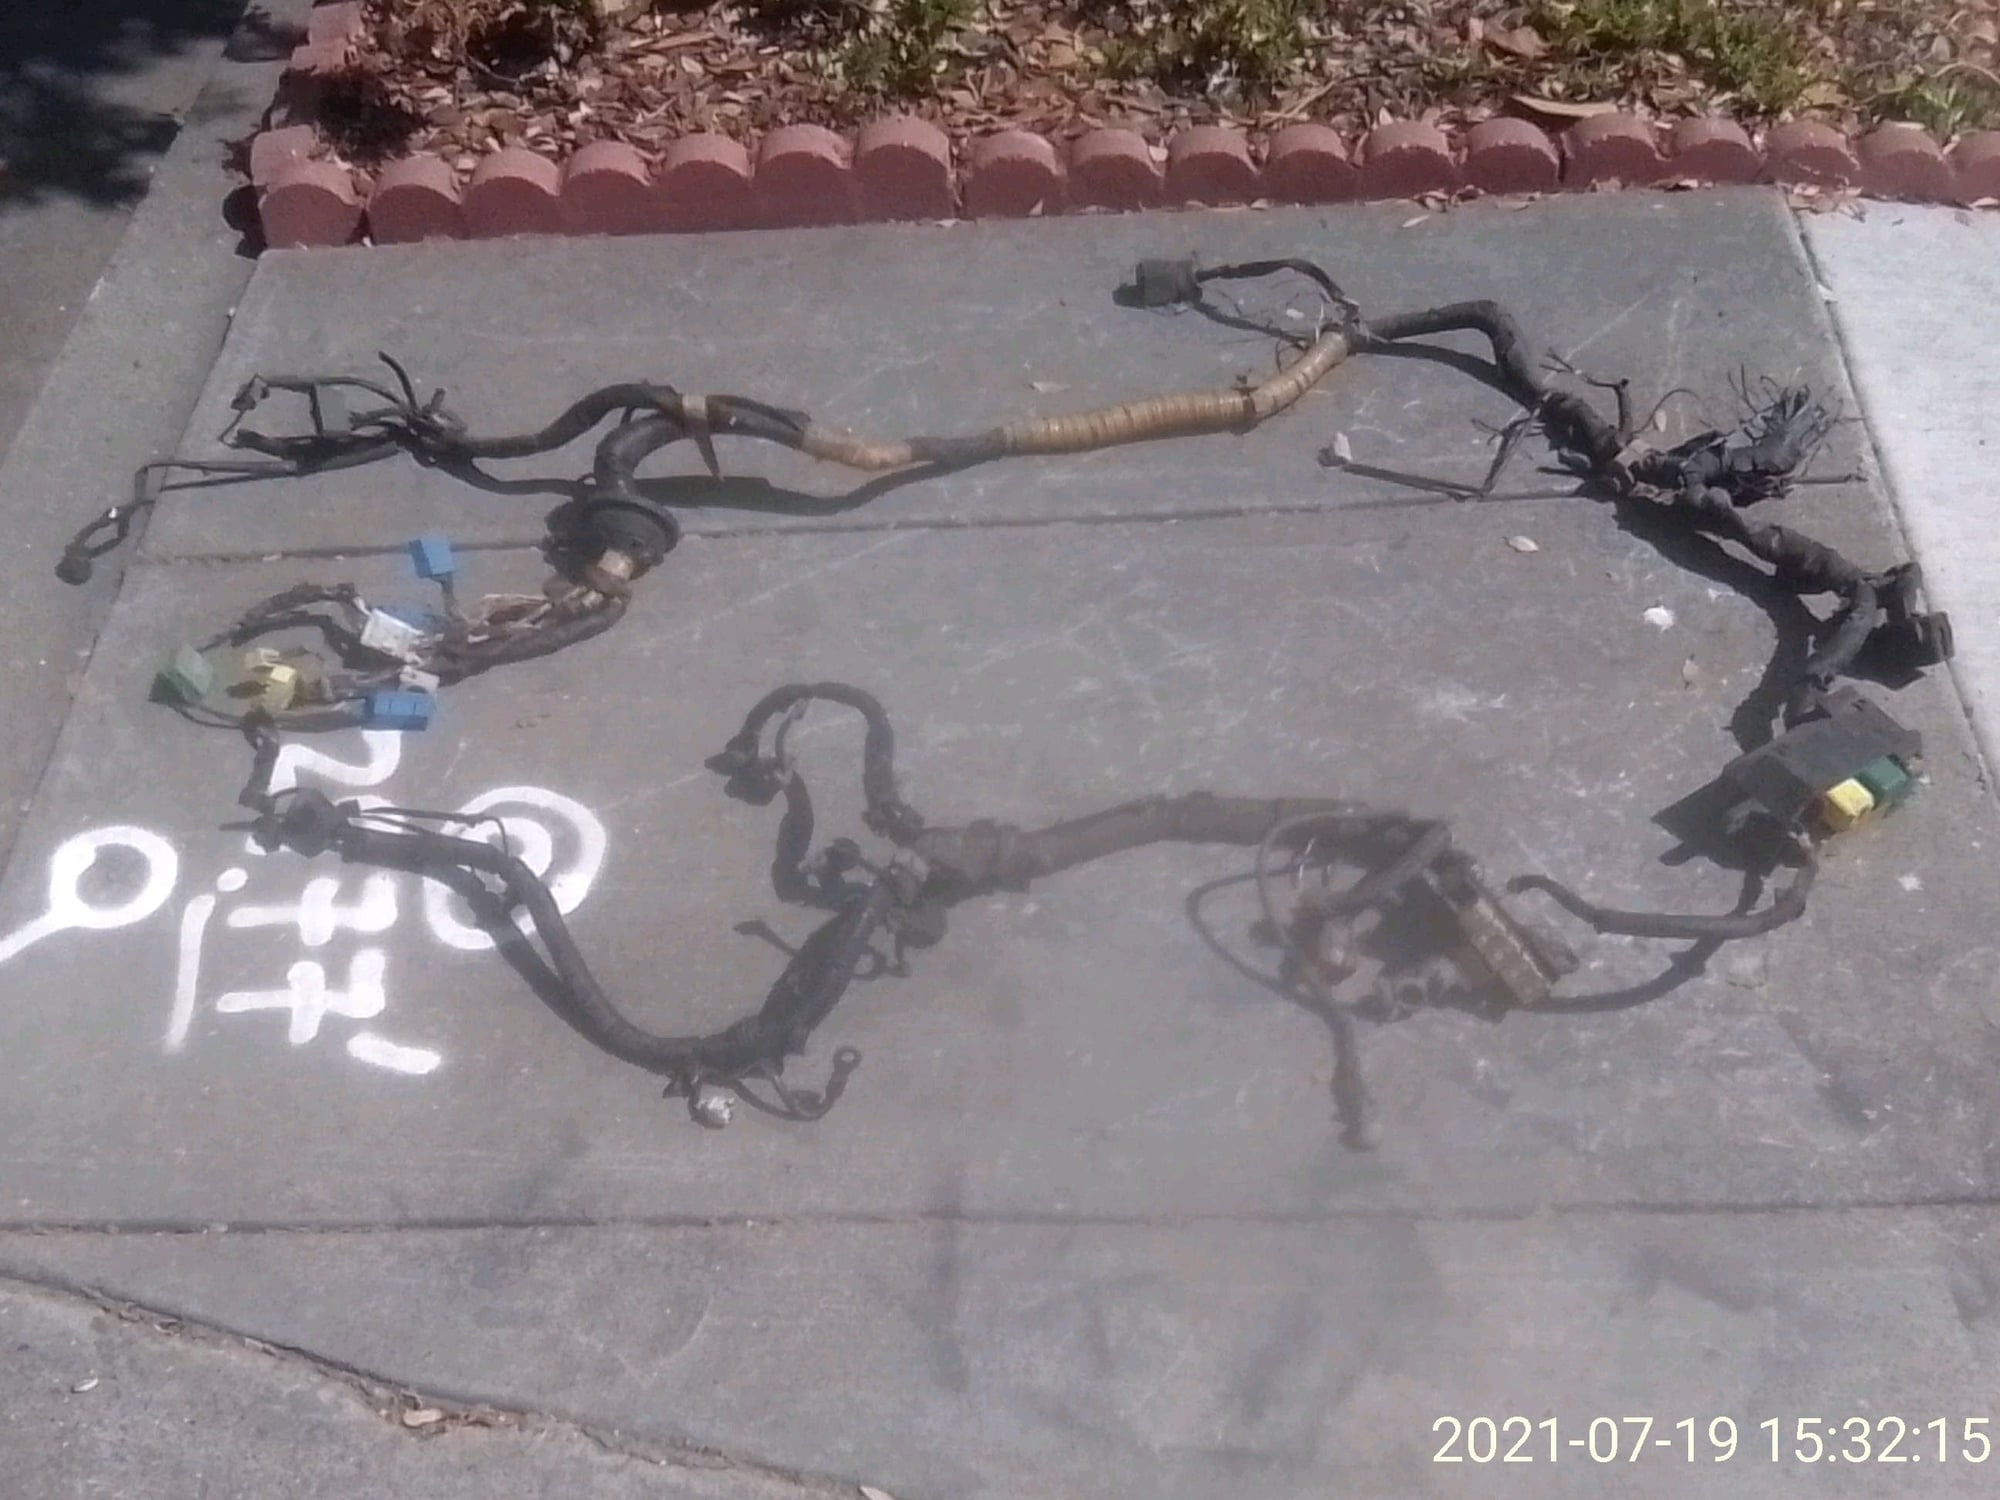 Engine - Electrical - FD - OEM Partial Wiring Harness left side - Used - 1993 to 1995 Mazda RX-7 - San Jose, CA 95121, United States